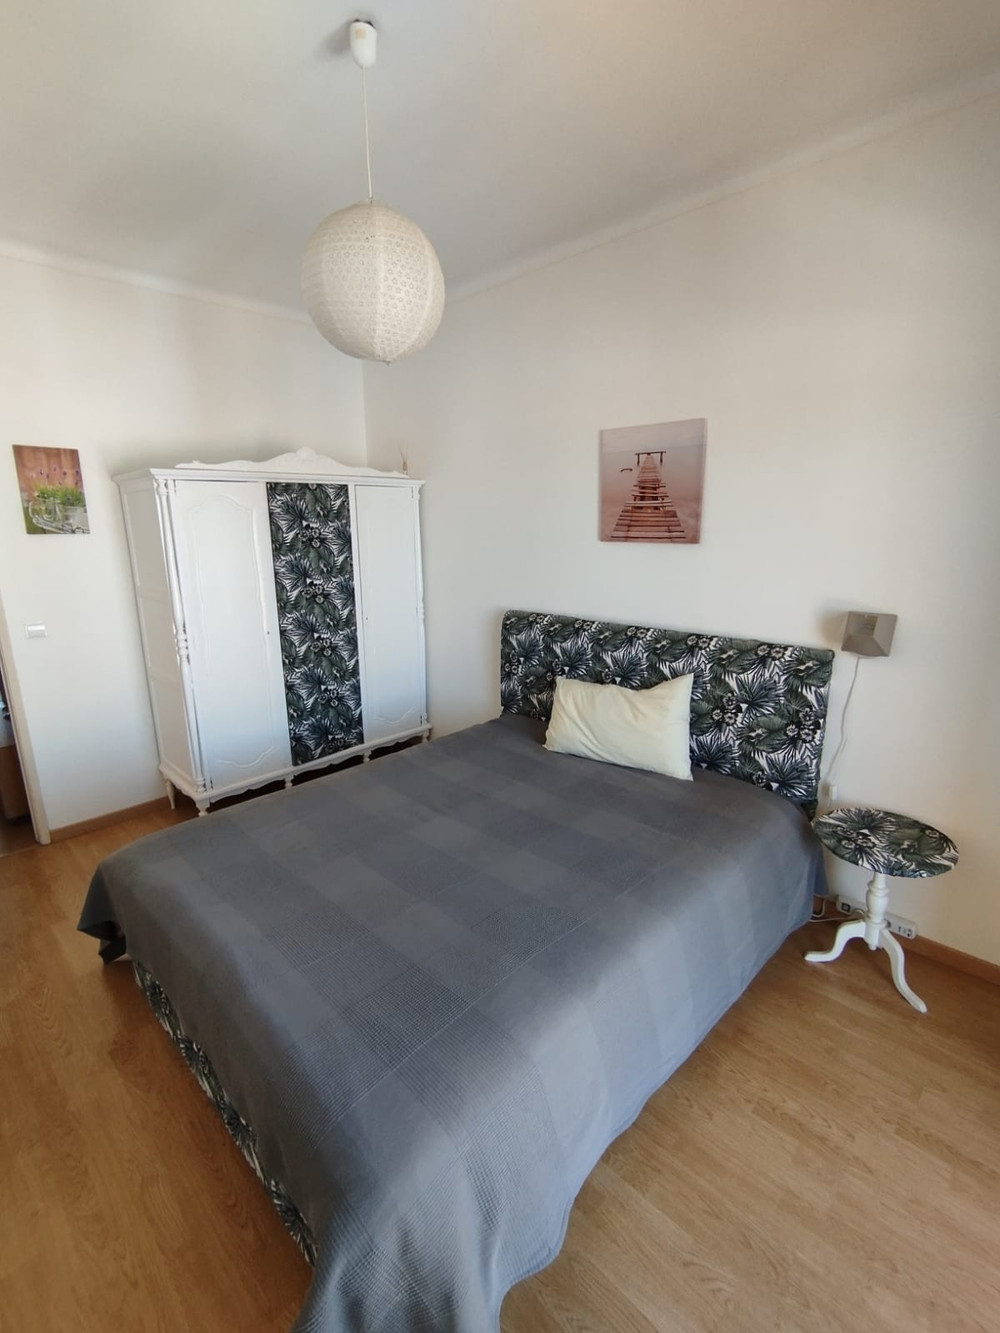 2 bedroom apartment in the center of Setúbal preview